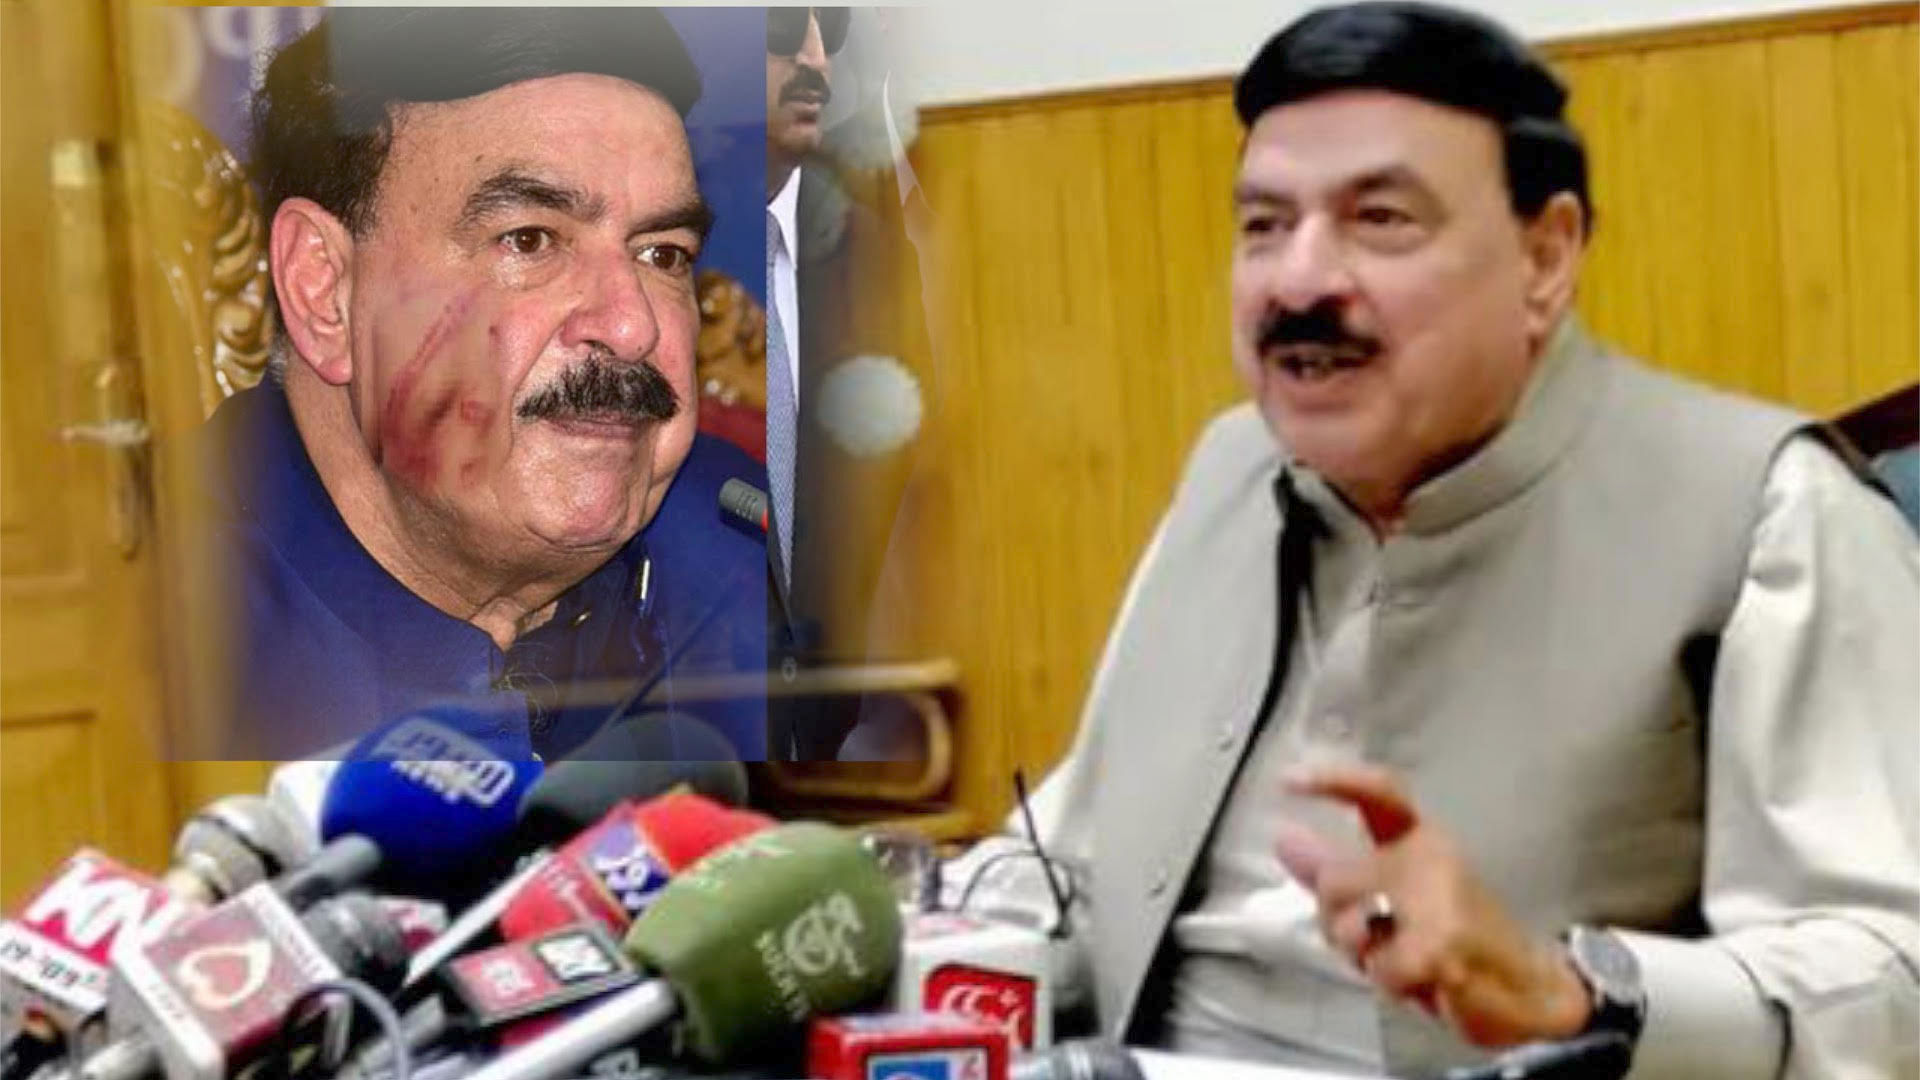 eggs thrown and punches blown at pakistan rail minister sheikh rasheed in london